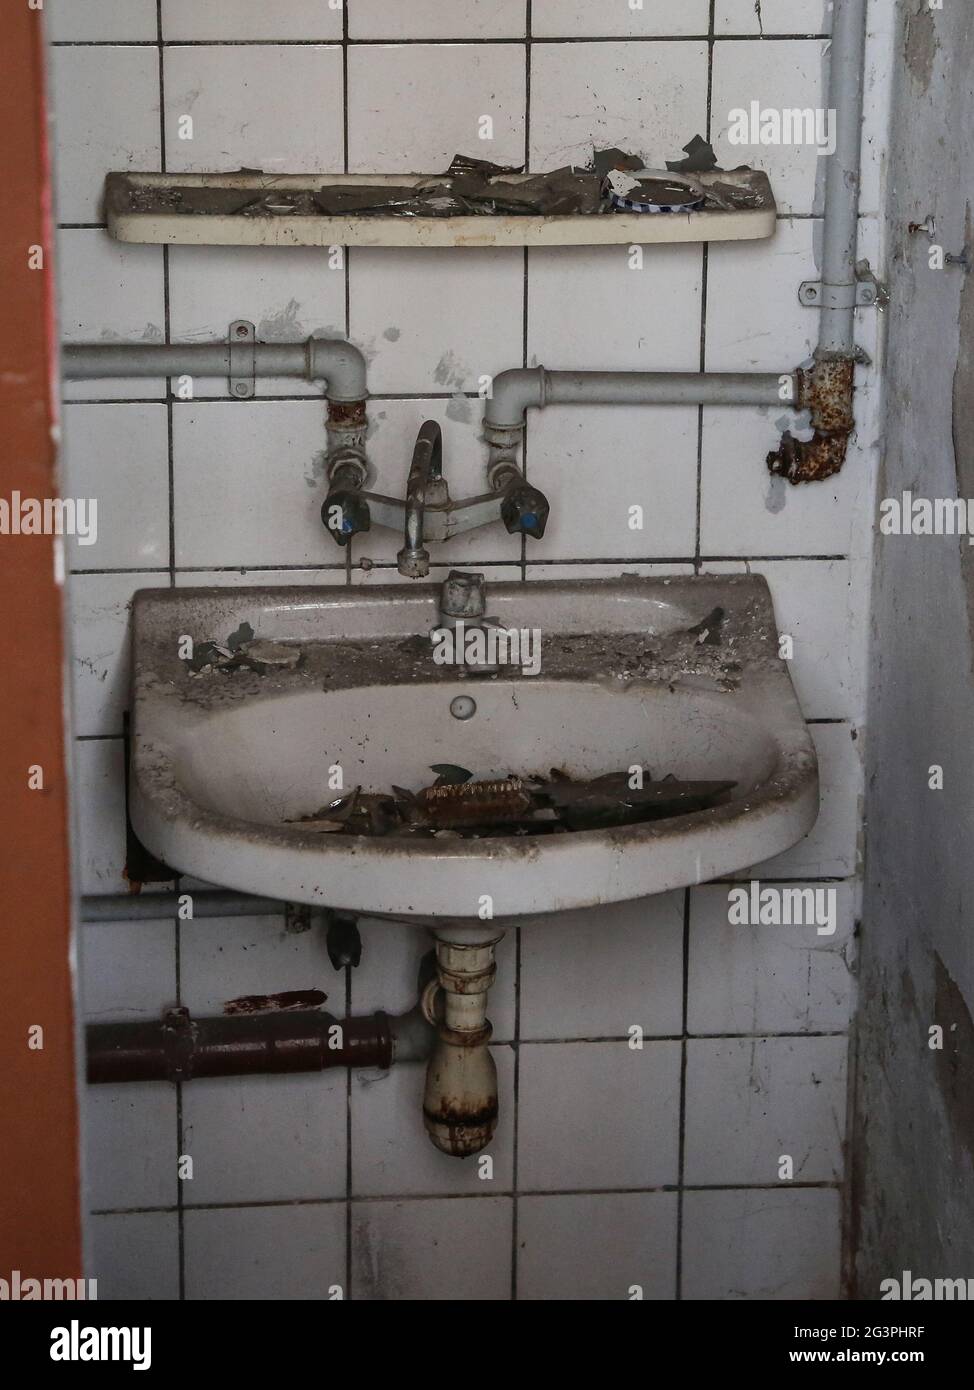 Dirty sink with water connection Stock Photo